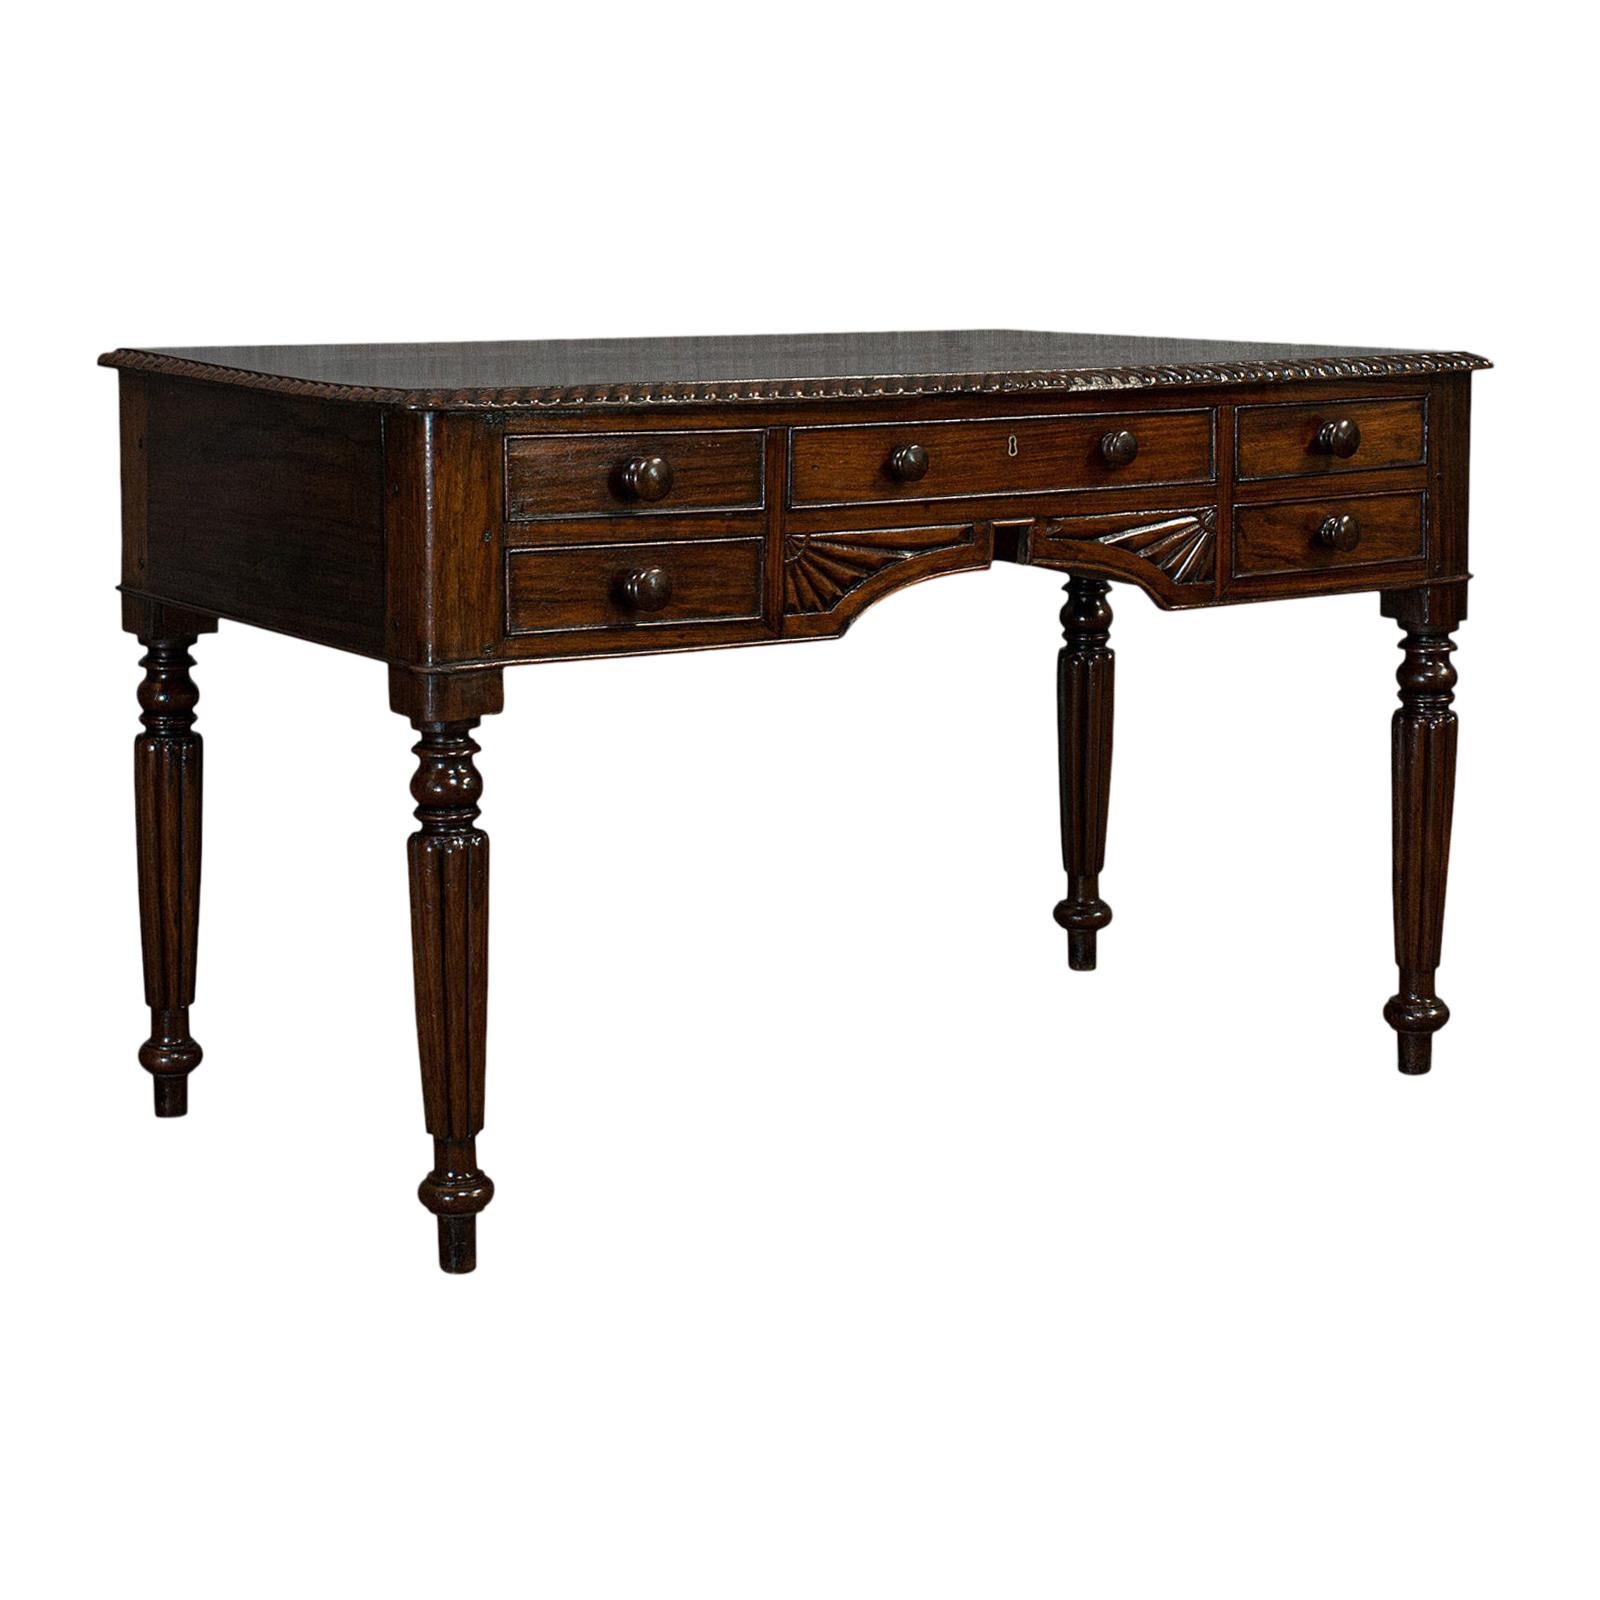 Antique Writing Desk, English, Rosewood, Study, Side, Table, Regency, circa 1820 For Sale